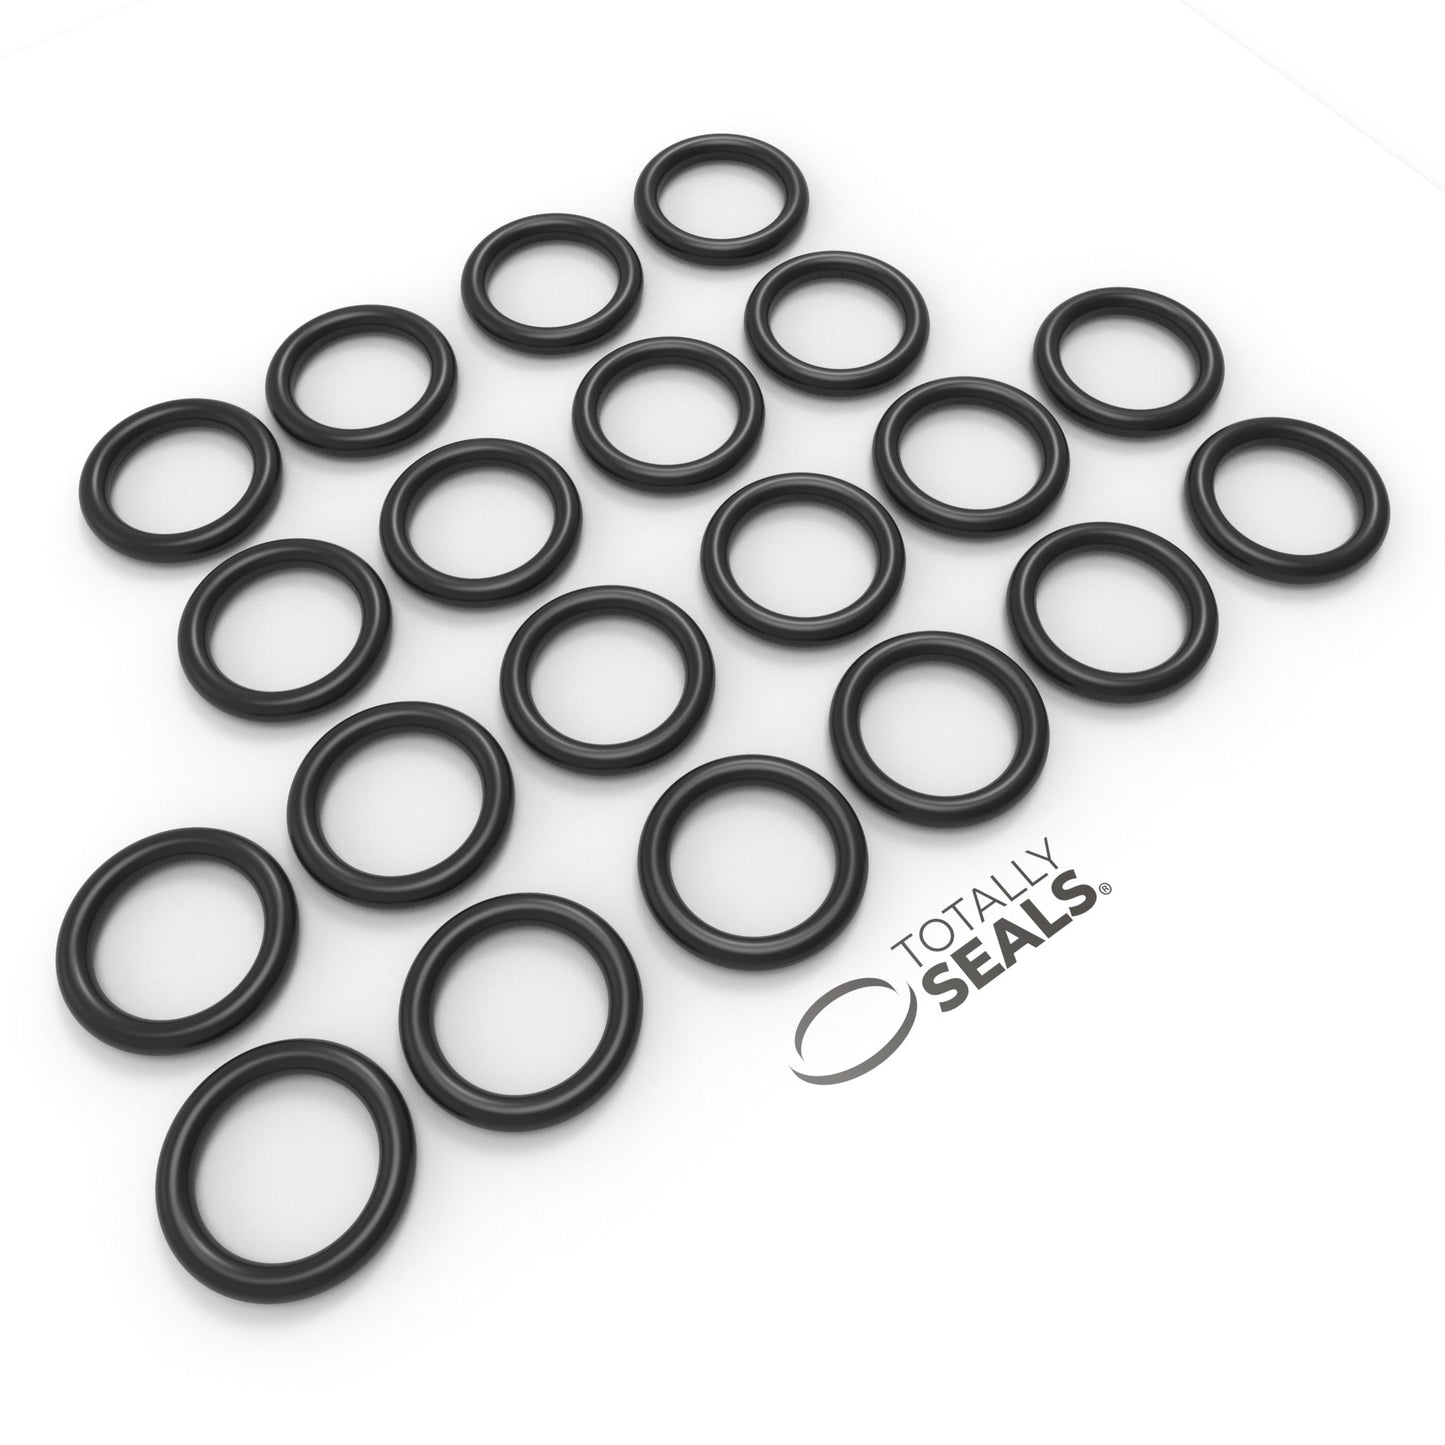 13/16" x 1/8" (BS211) Imperial Nitrile O-Rings - Totally Seals®